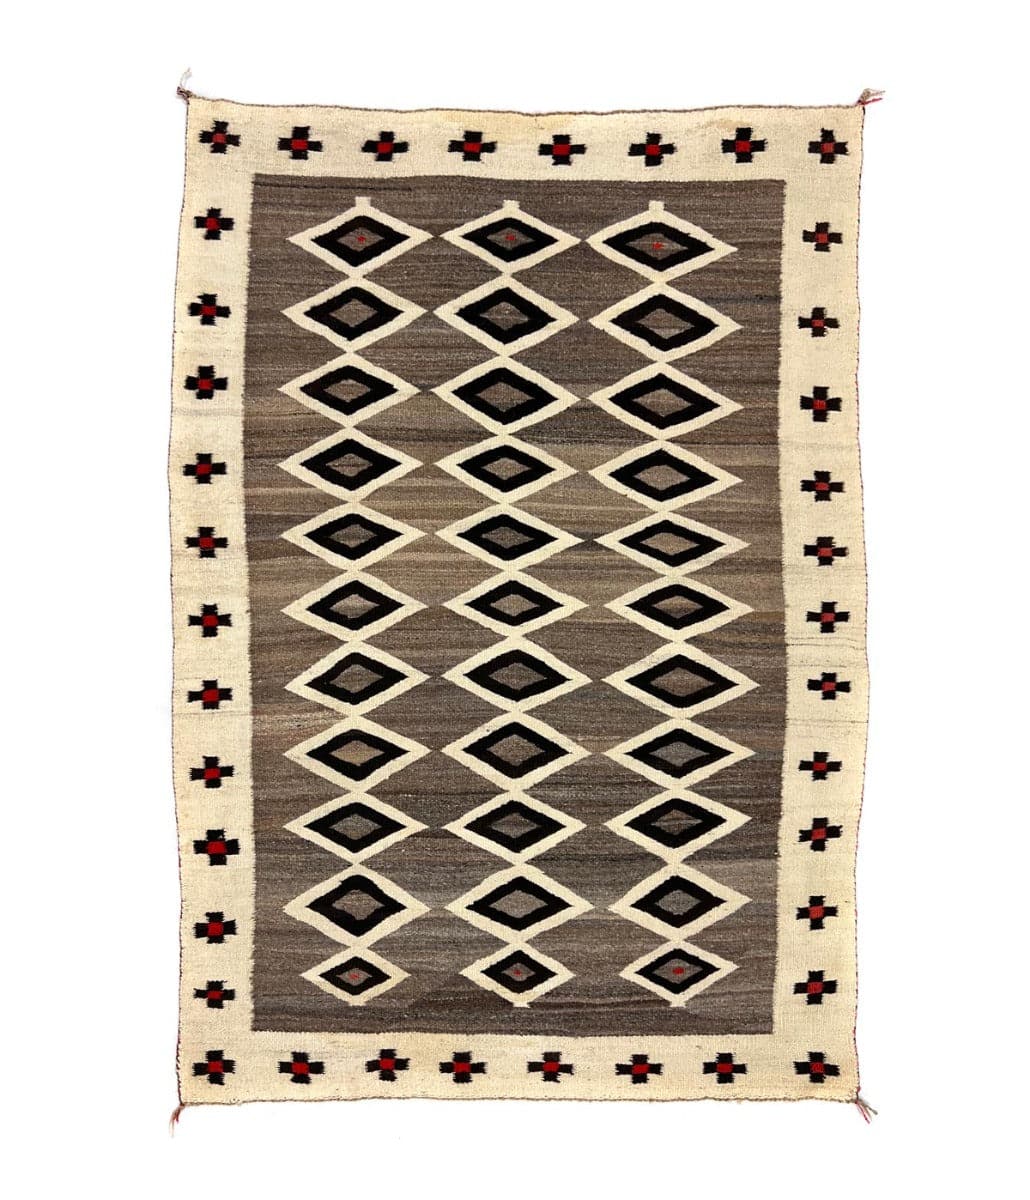 Navajo Crystal Rug with Cross Designs c. 1880-1893, 75.5" x 53.5" (T91654A-0422-005) 8